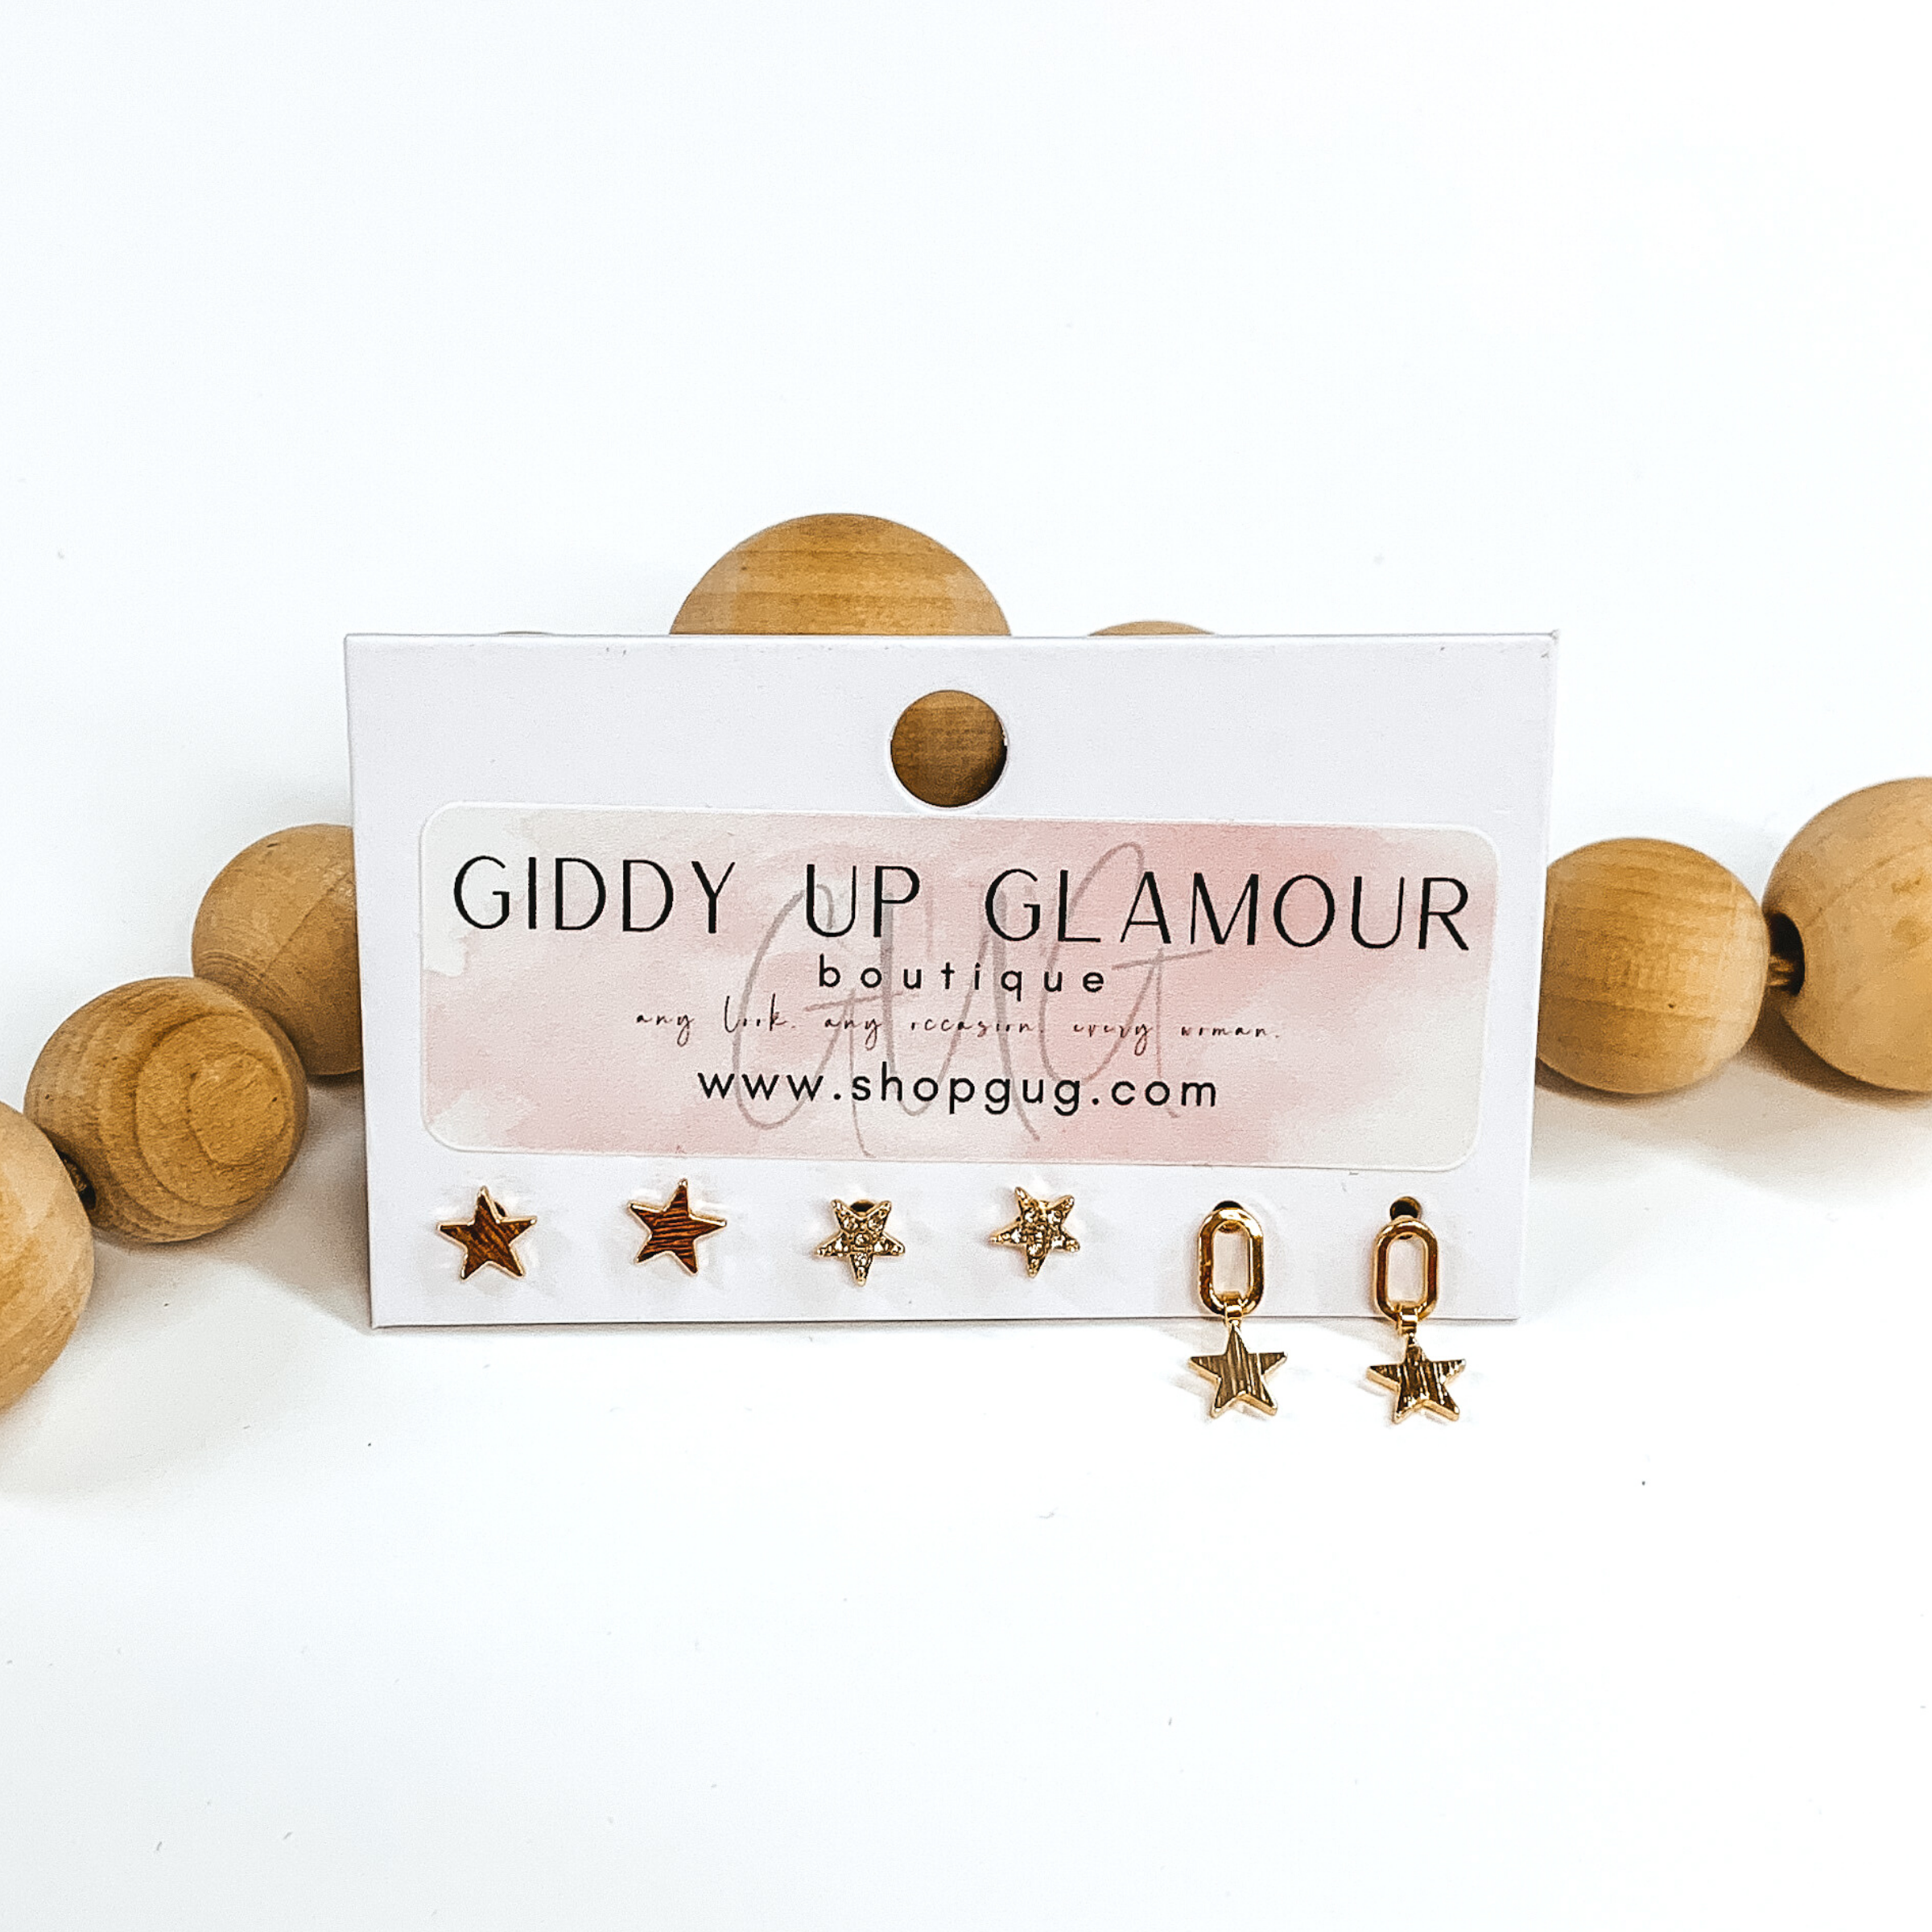 This is a 3 piece gold earring set. There are two sets of gold stud earrings; one is plain and the other has clear crystals. The last earrings is an open oval with a hanging star charm. These earrings are pictured on a Giddy Up Glamour earring holder laying in front of tan beads on a white background.